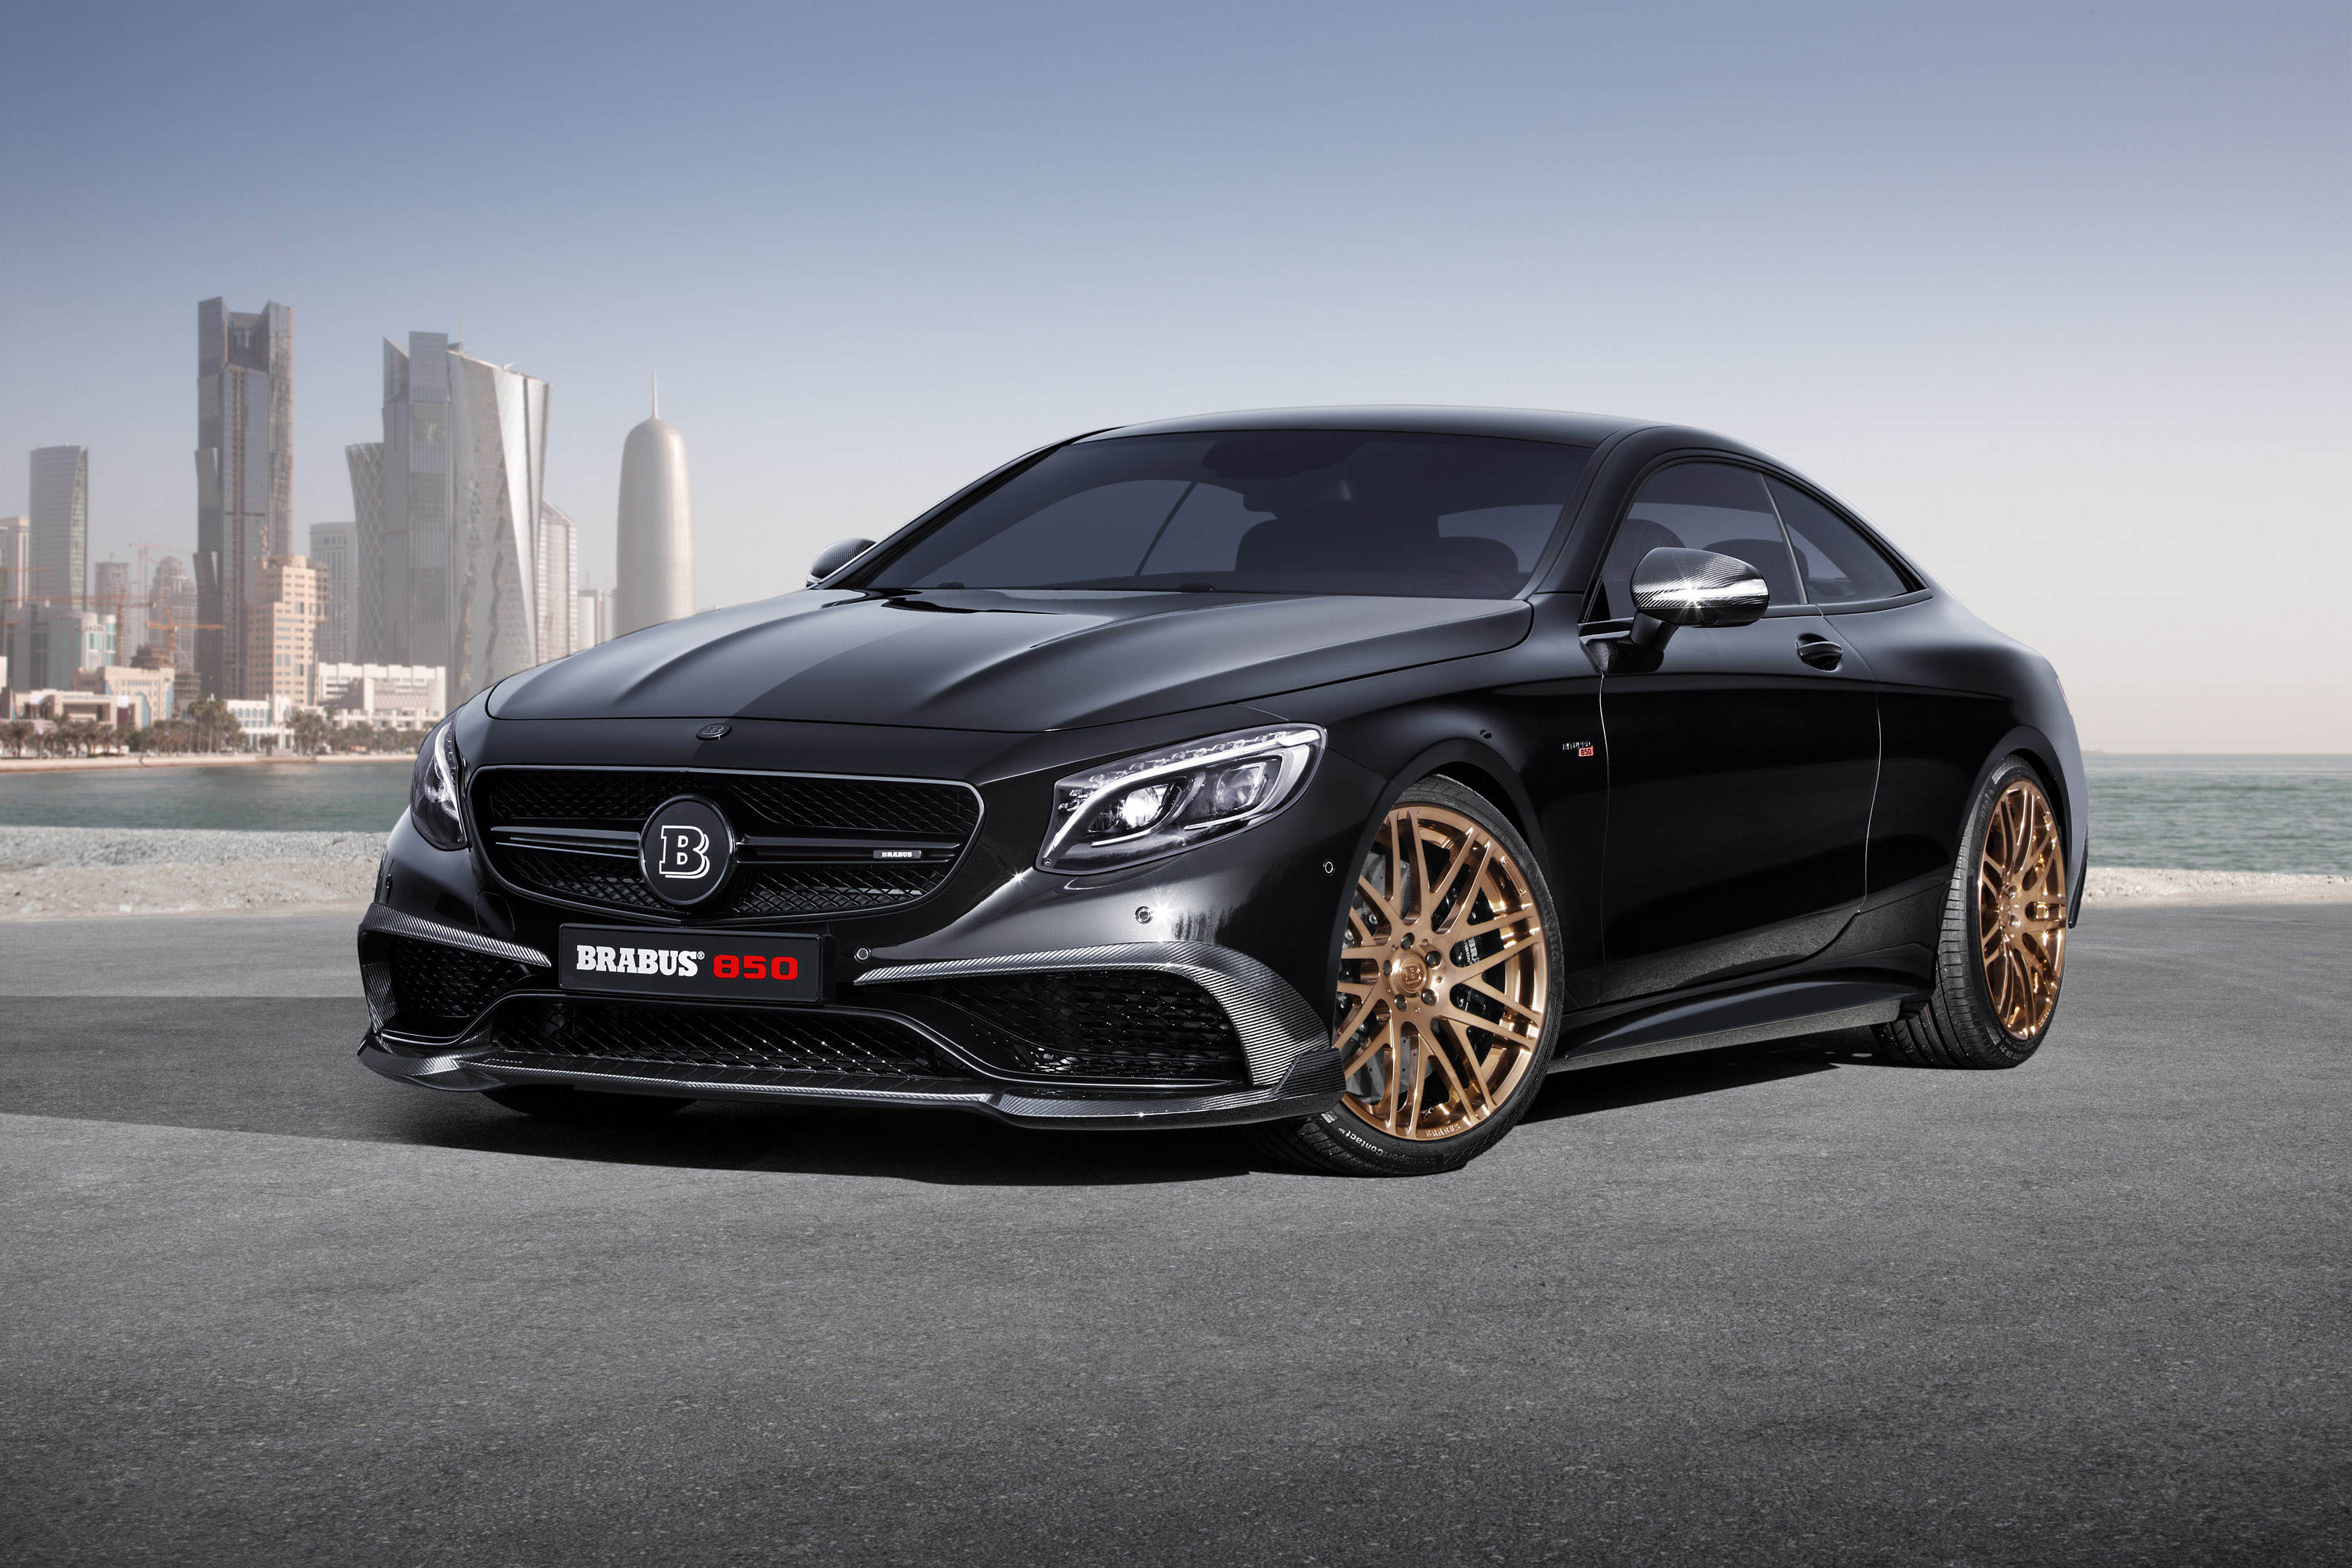 The new Brabus 850 is a modified V12 Maybach with 838bhp